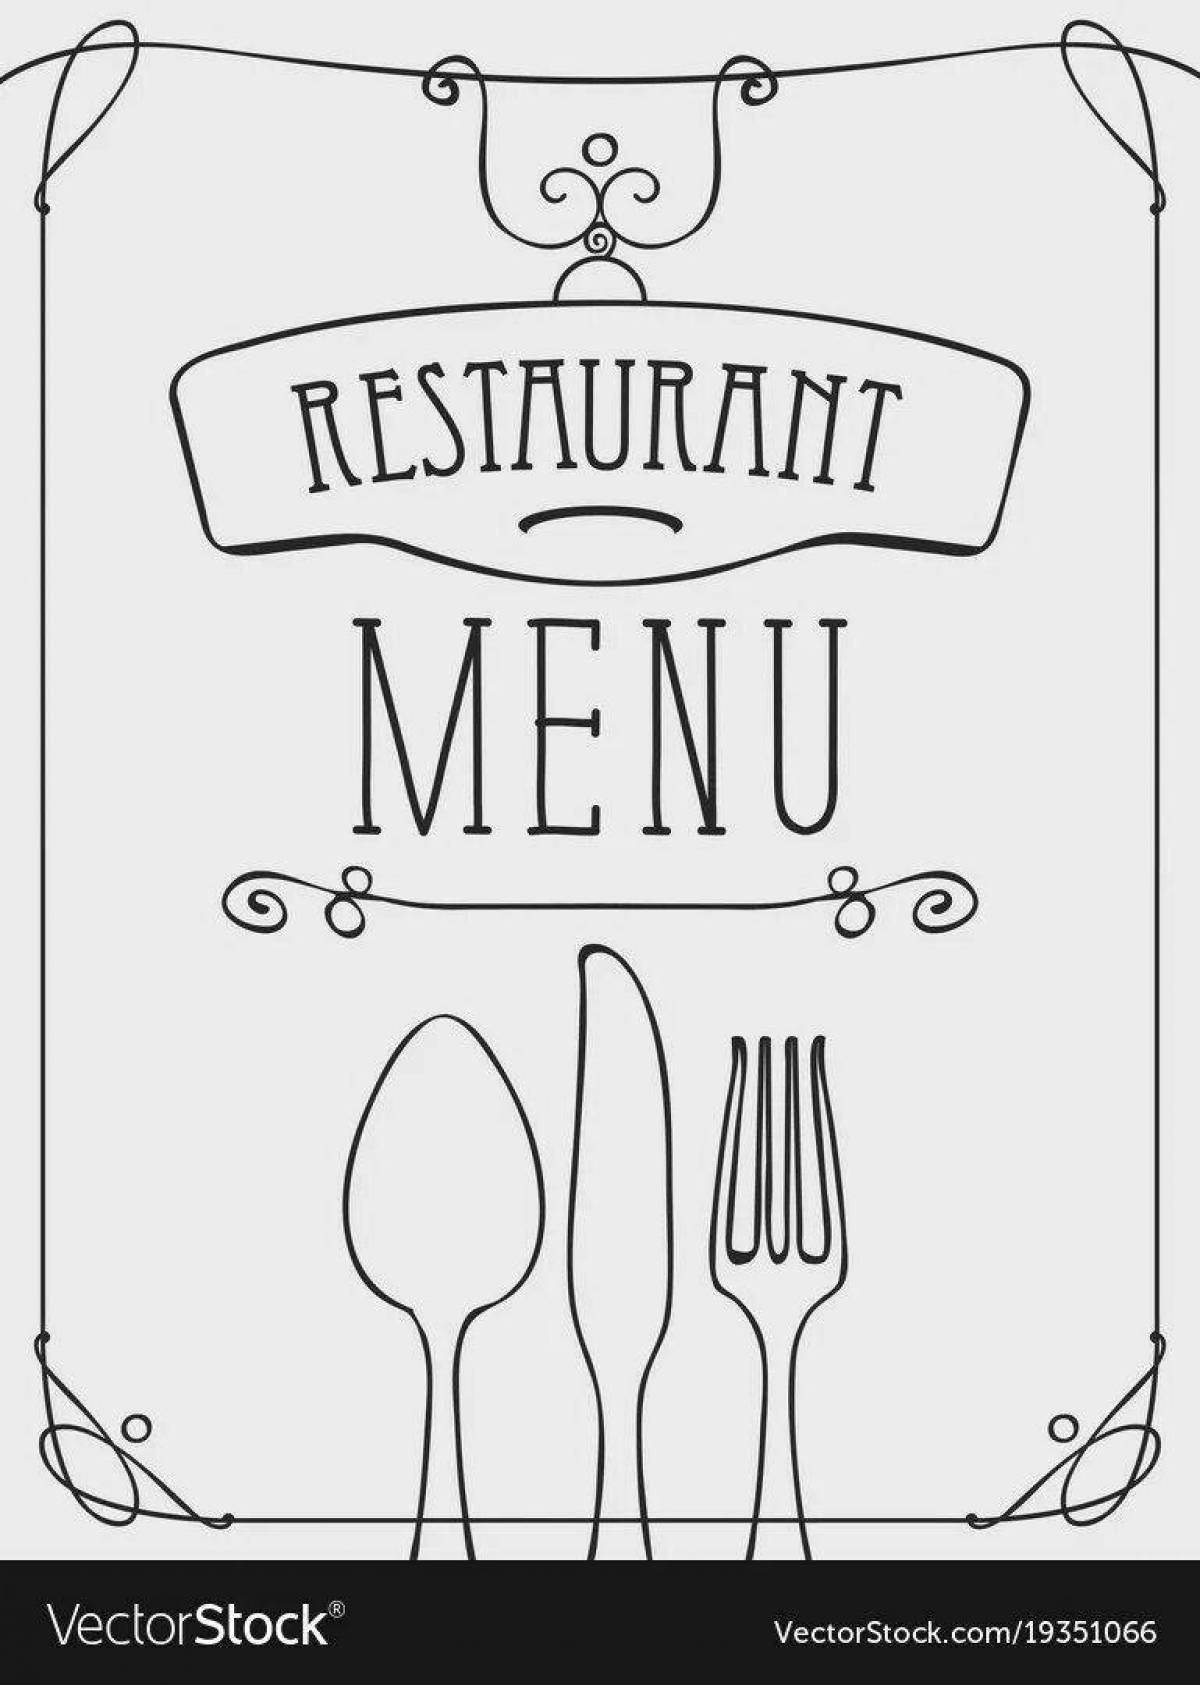 A funny restaurant menu coloring page